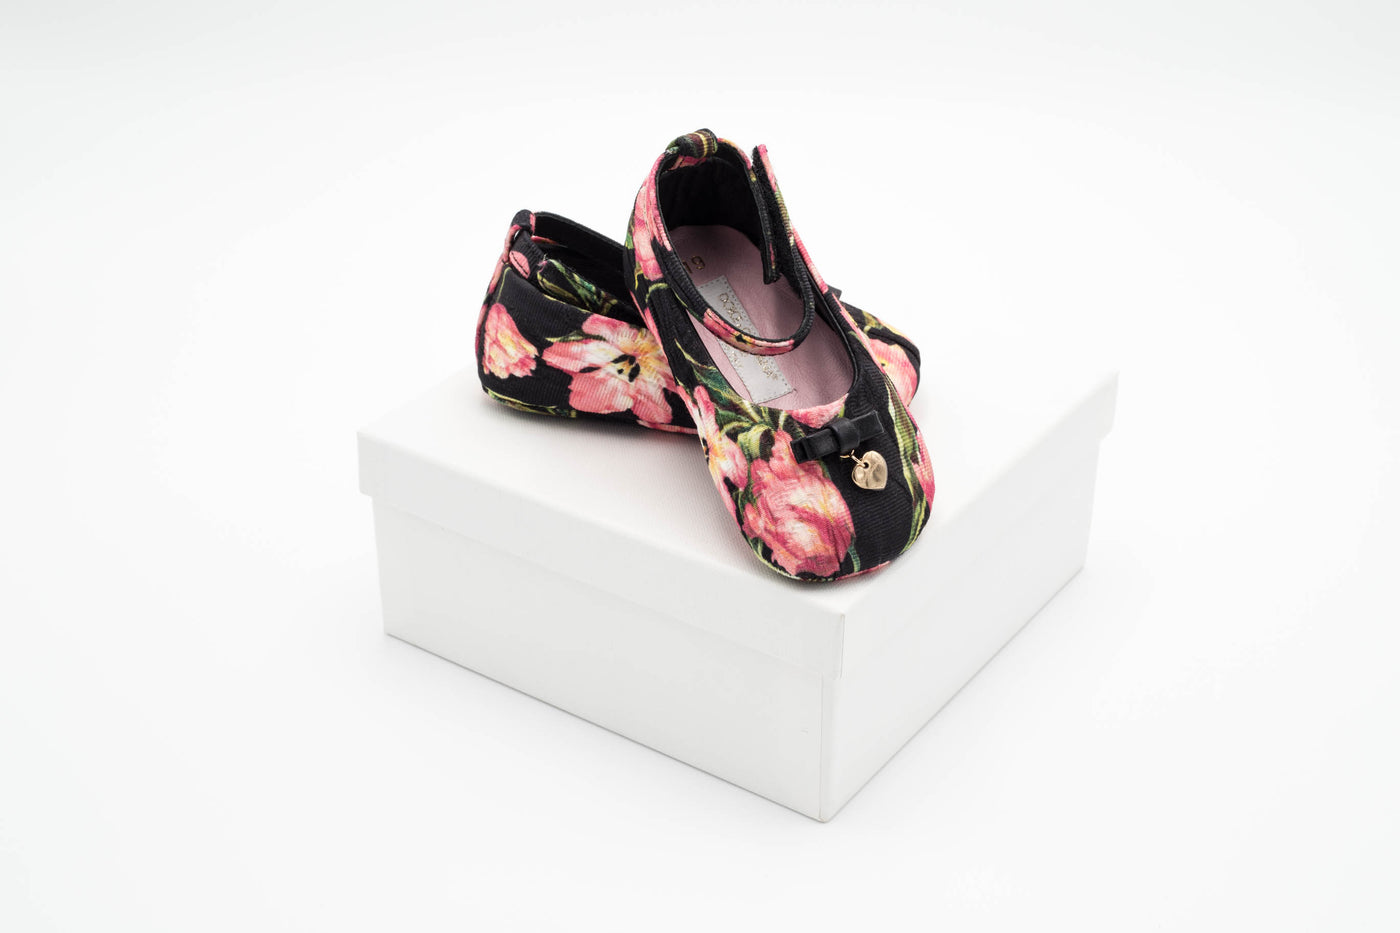 Dolce & Gabbana – Girls Black Ballerinas with Bow Detail and Flowers